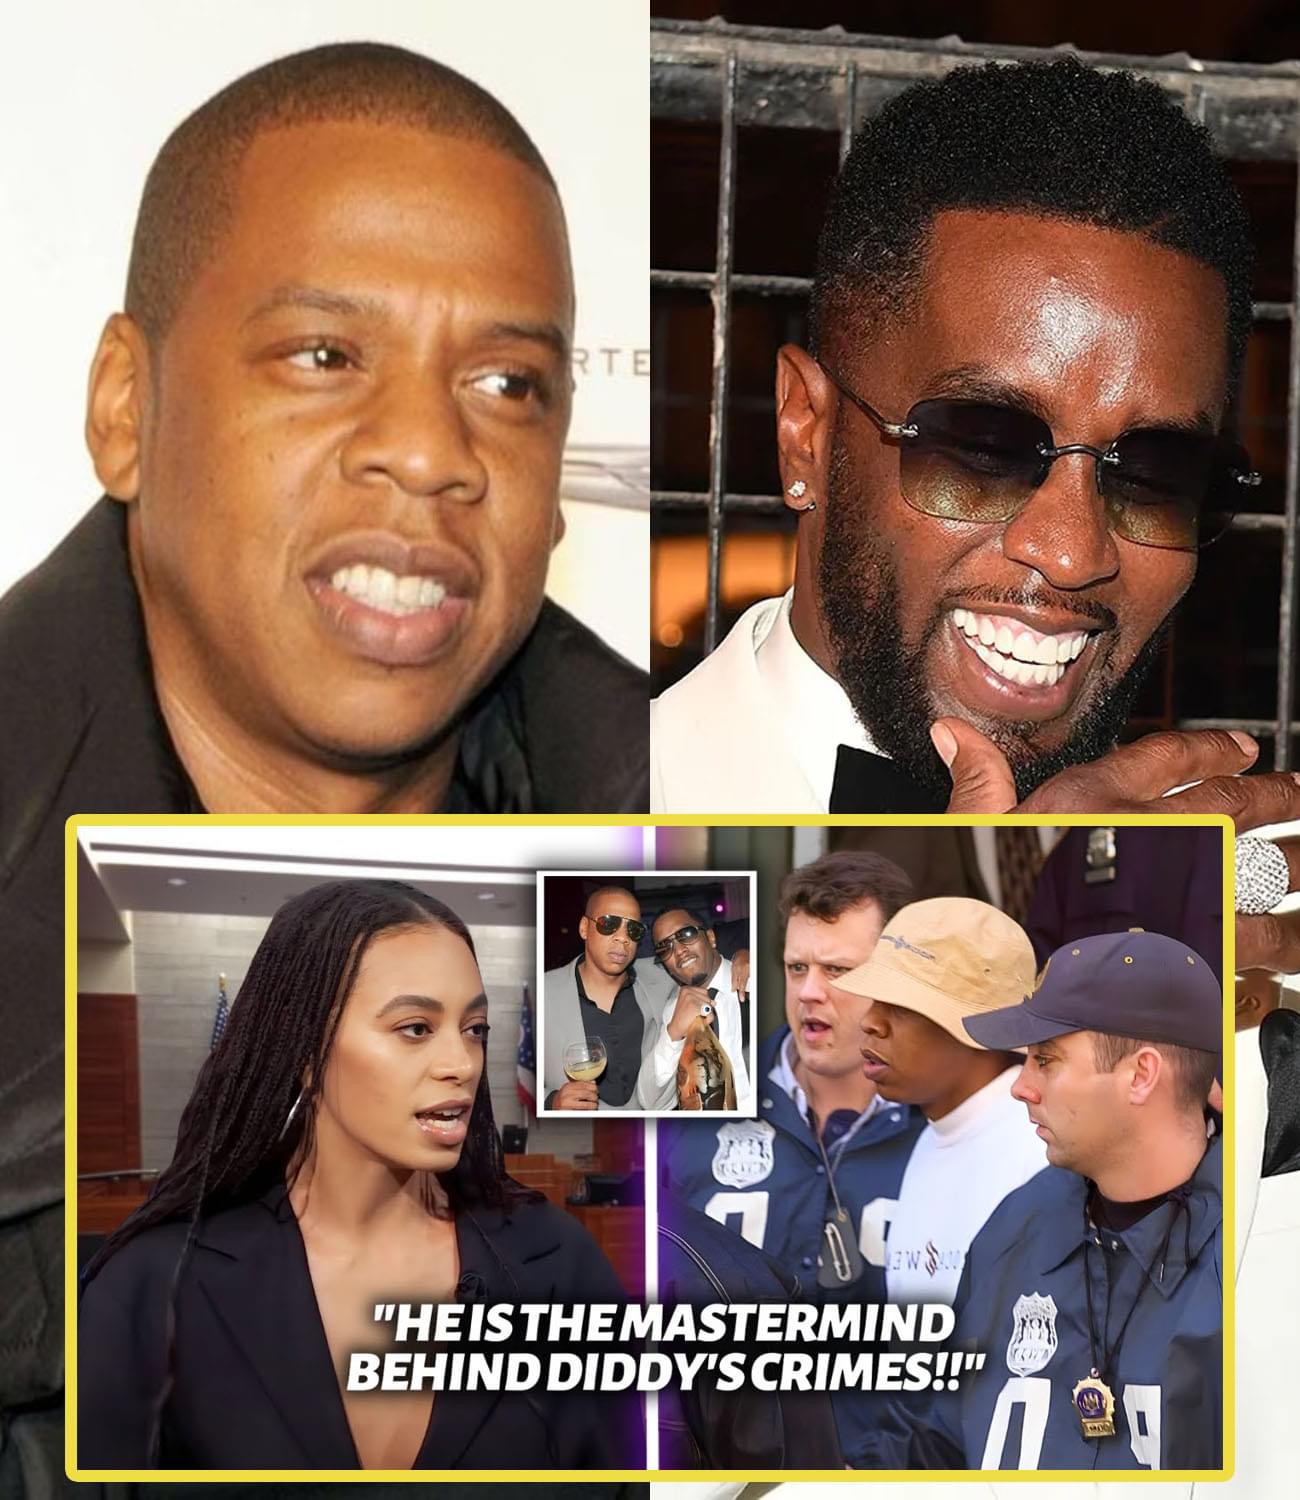 Solange Snitches On Jay Z And Exposes Him For Being Worse Than Diddy